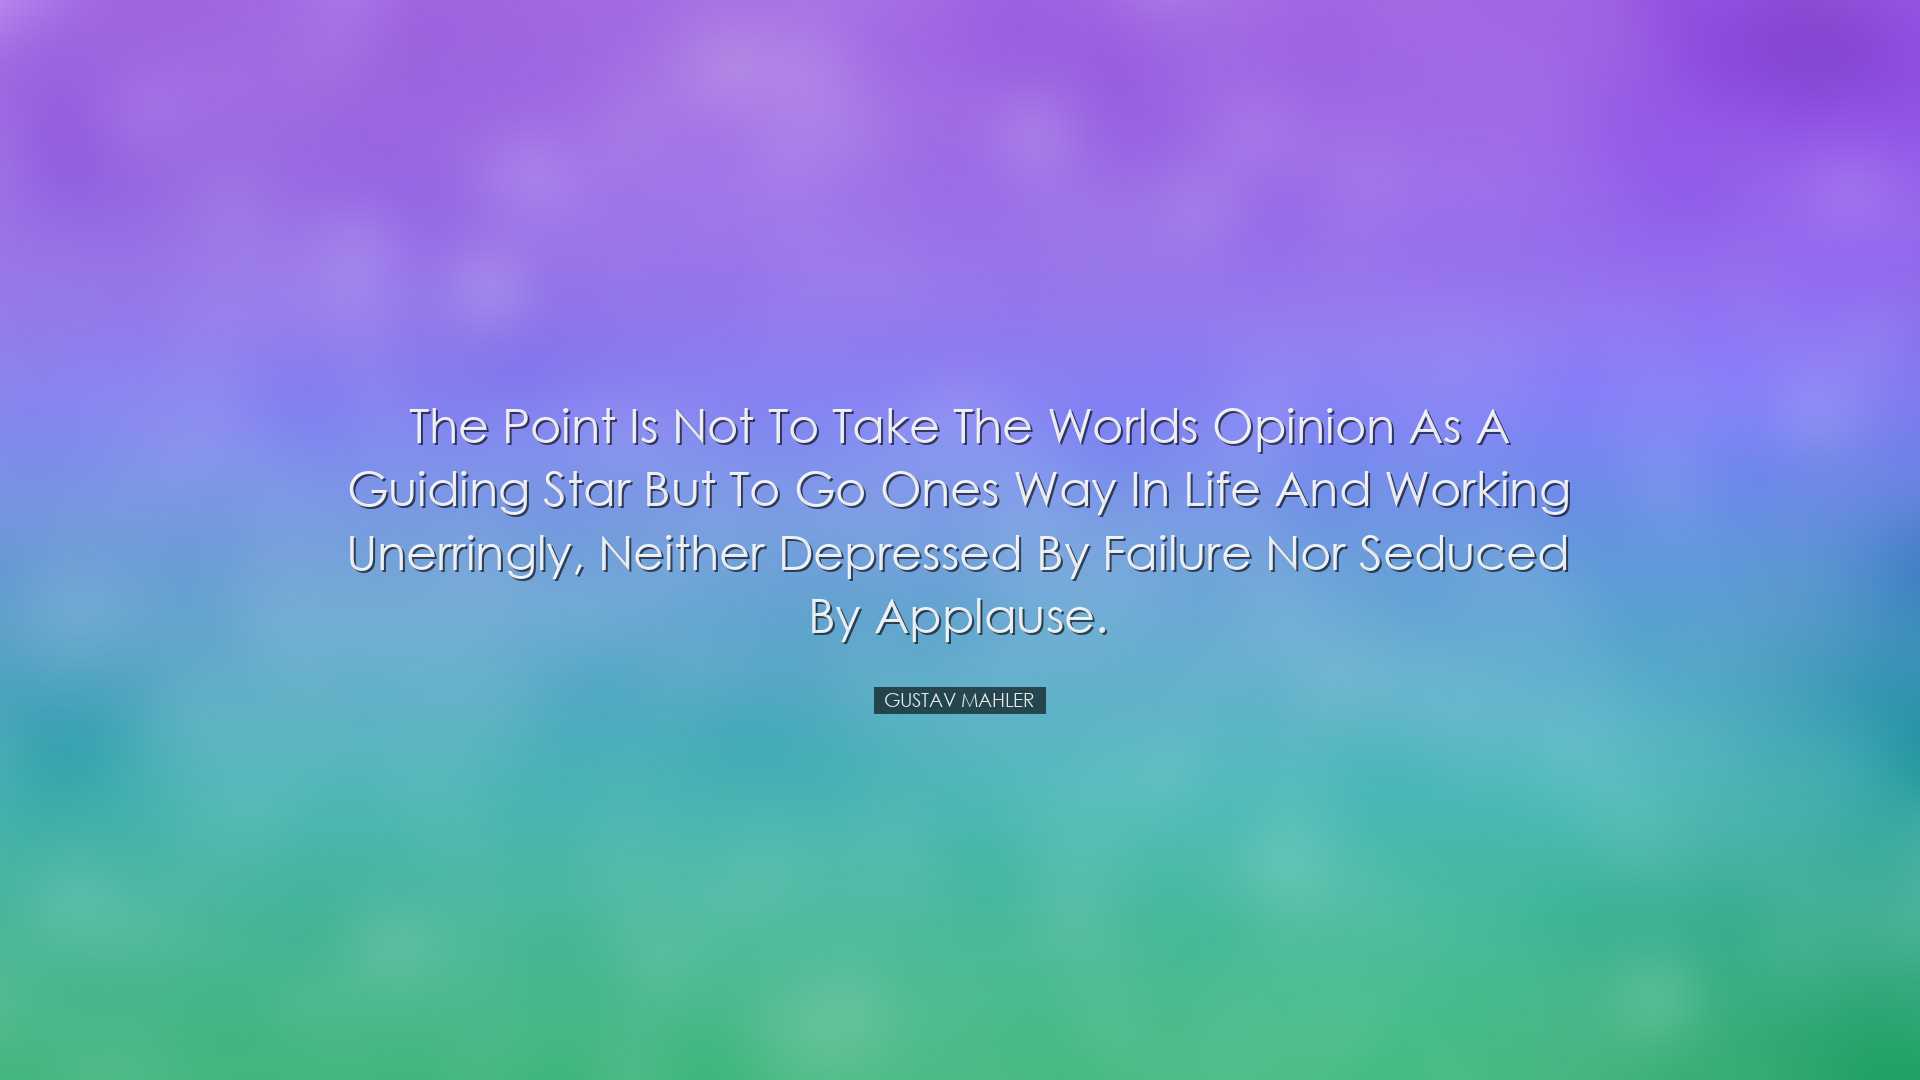 The point is not to take the worlds opinion as a guiding star but